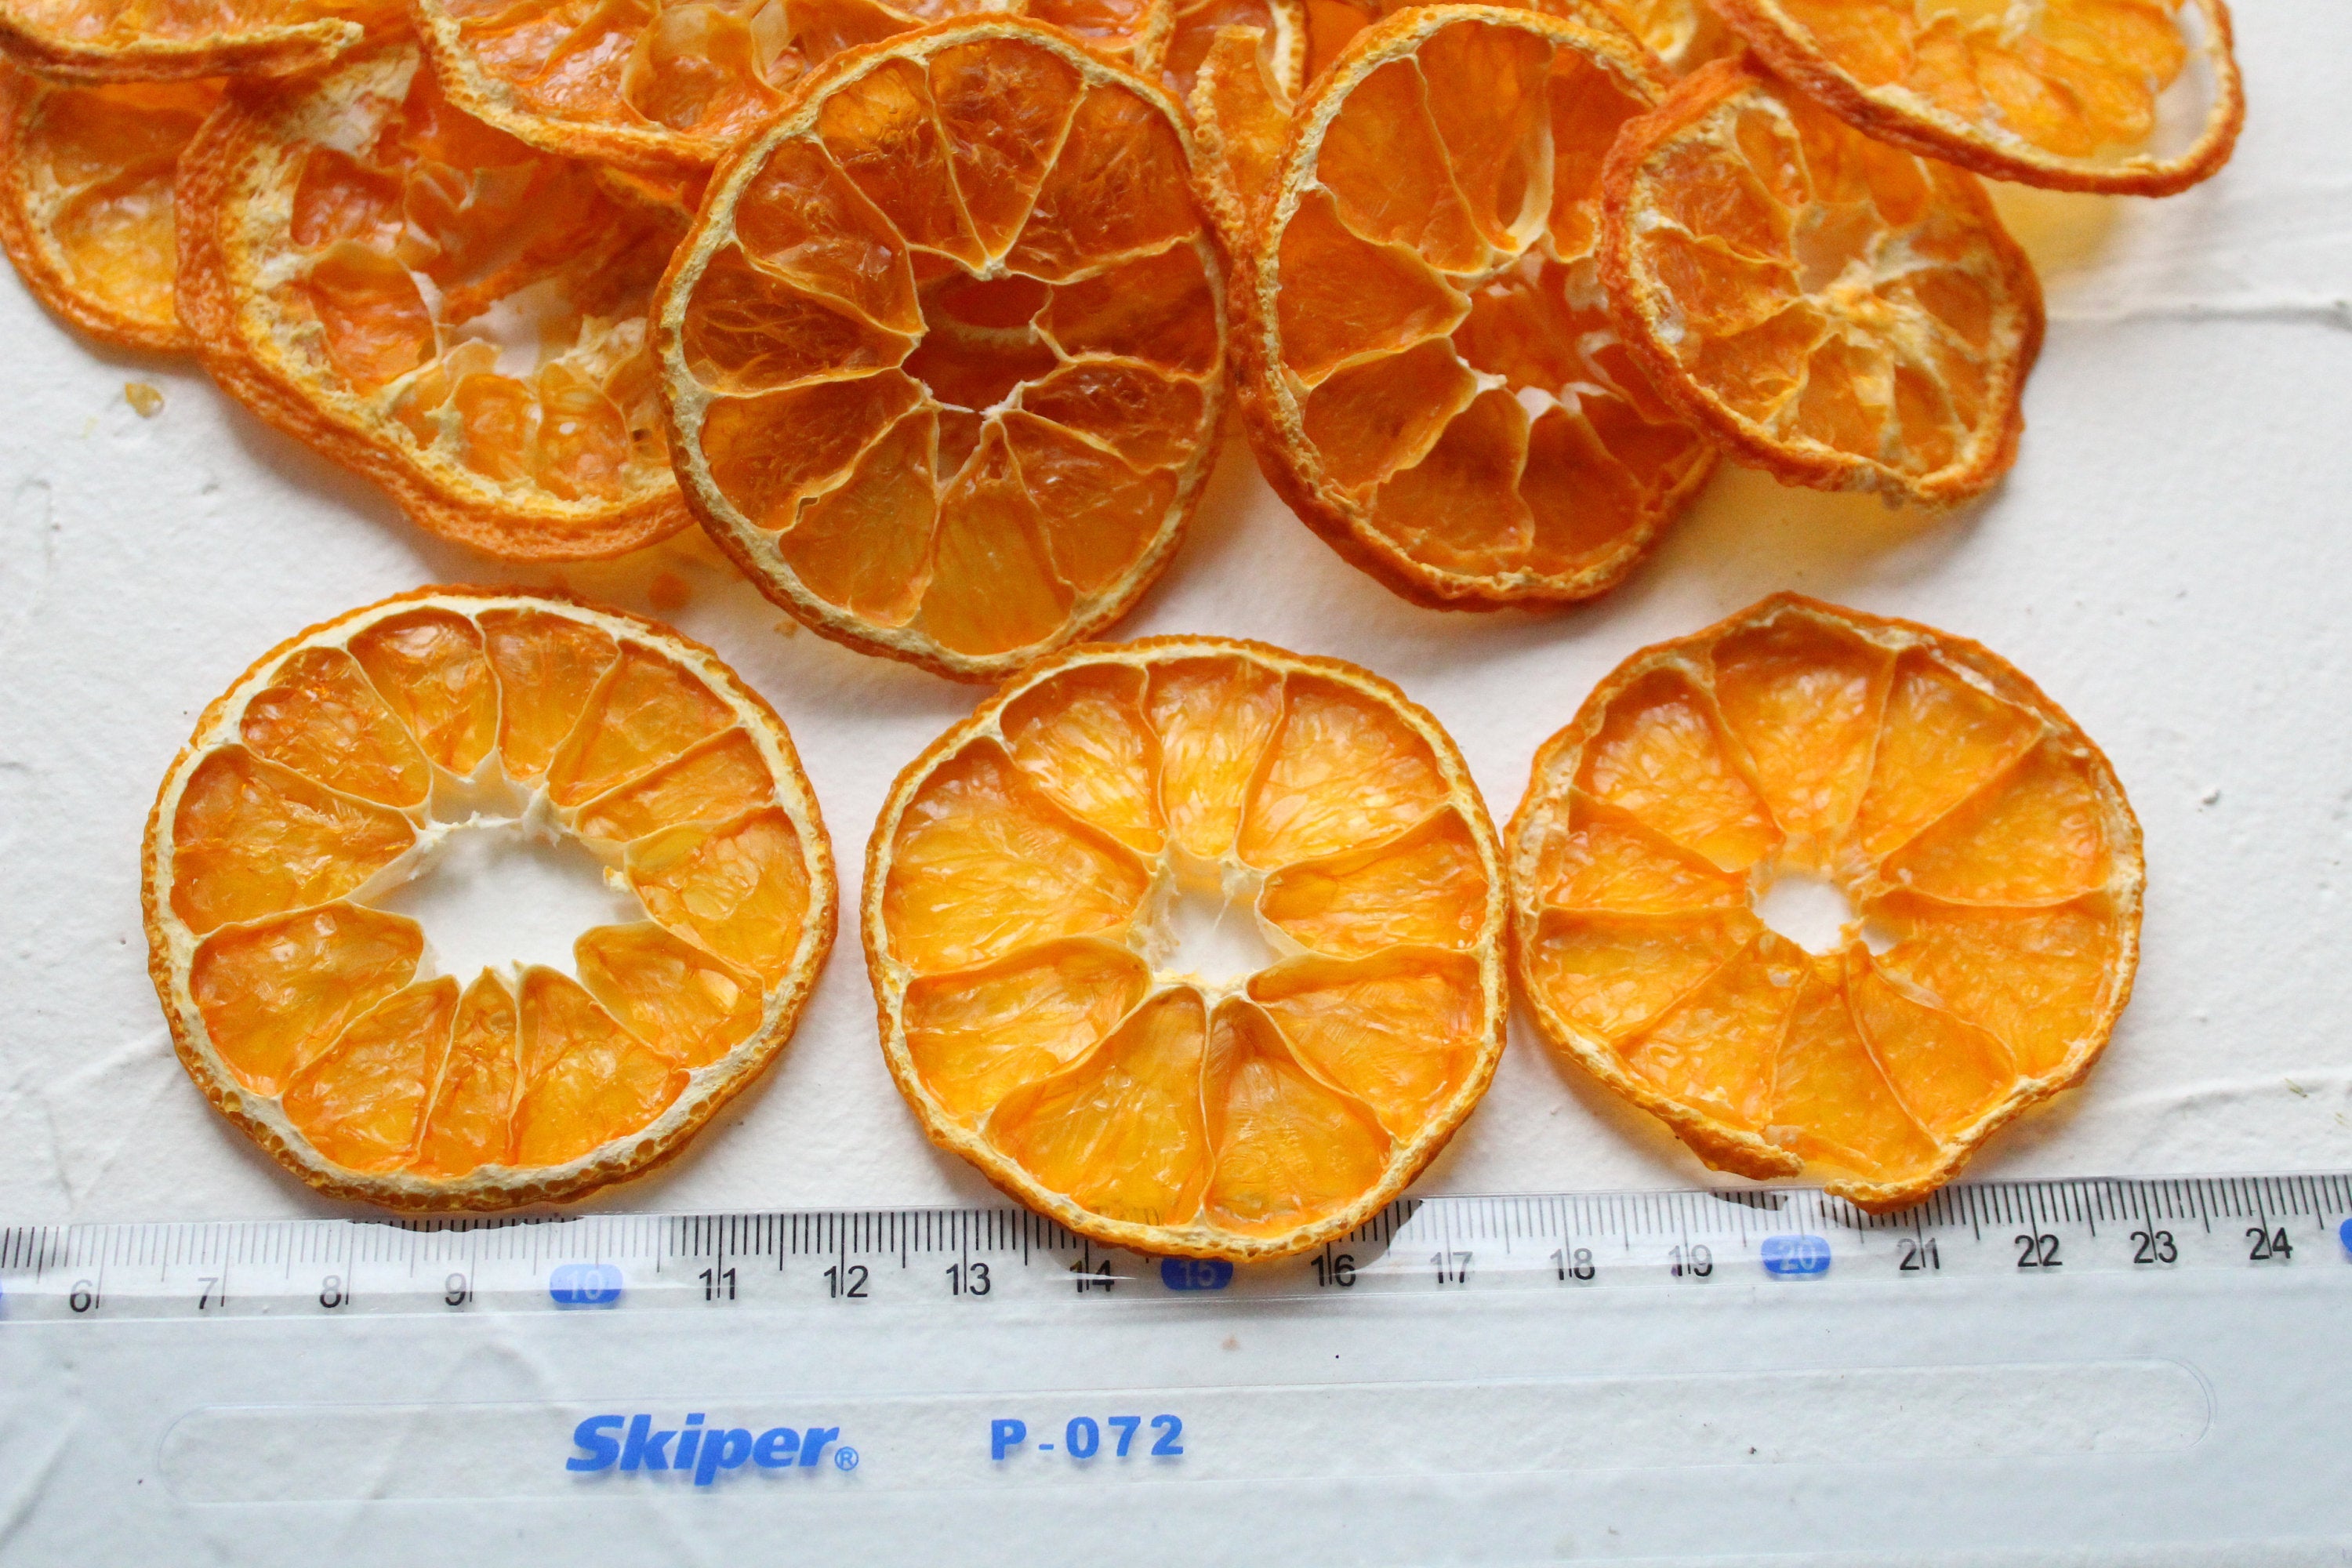 10 pcs of Dried Organic Homemade Mandarin Tangerine Slices, Air Dried, No Preservatives, Colors and Artificial Additives